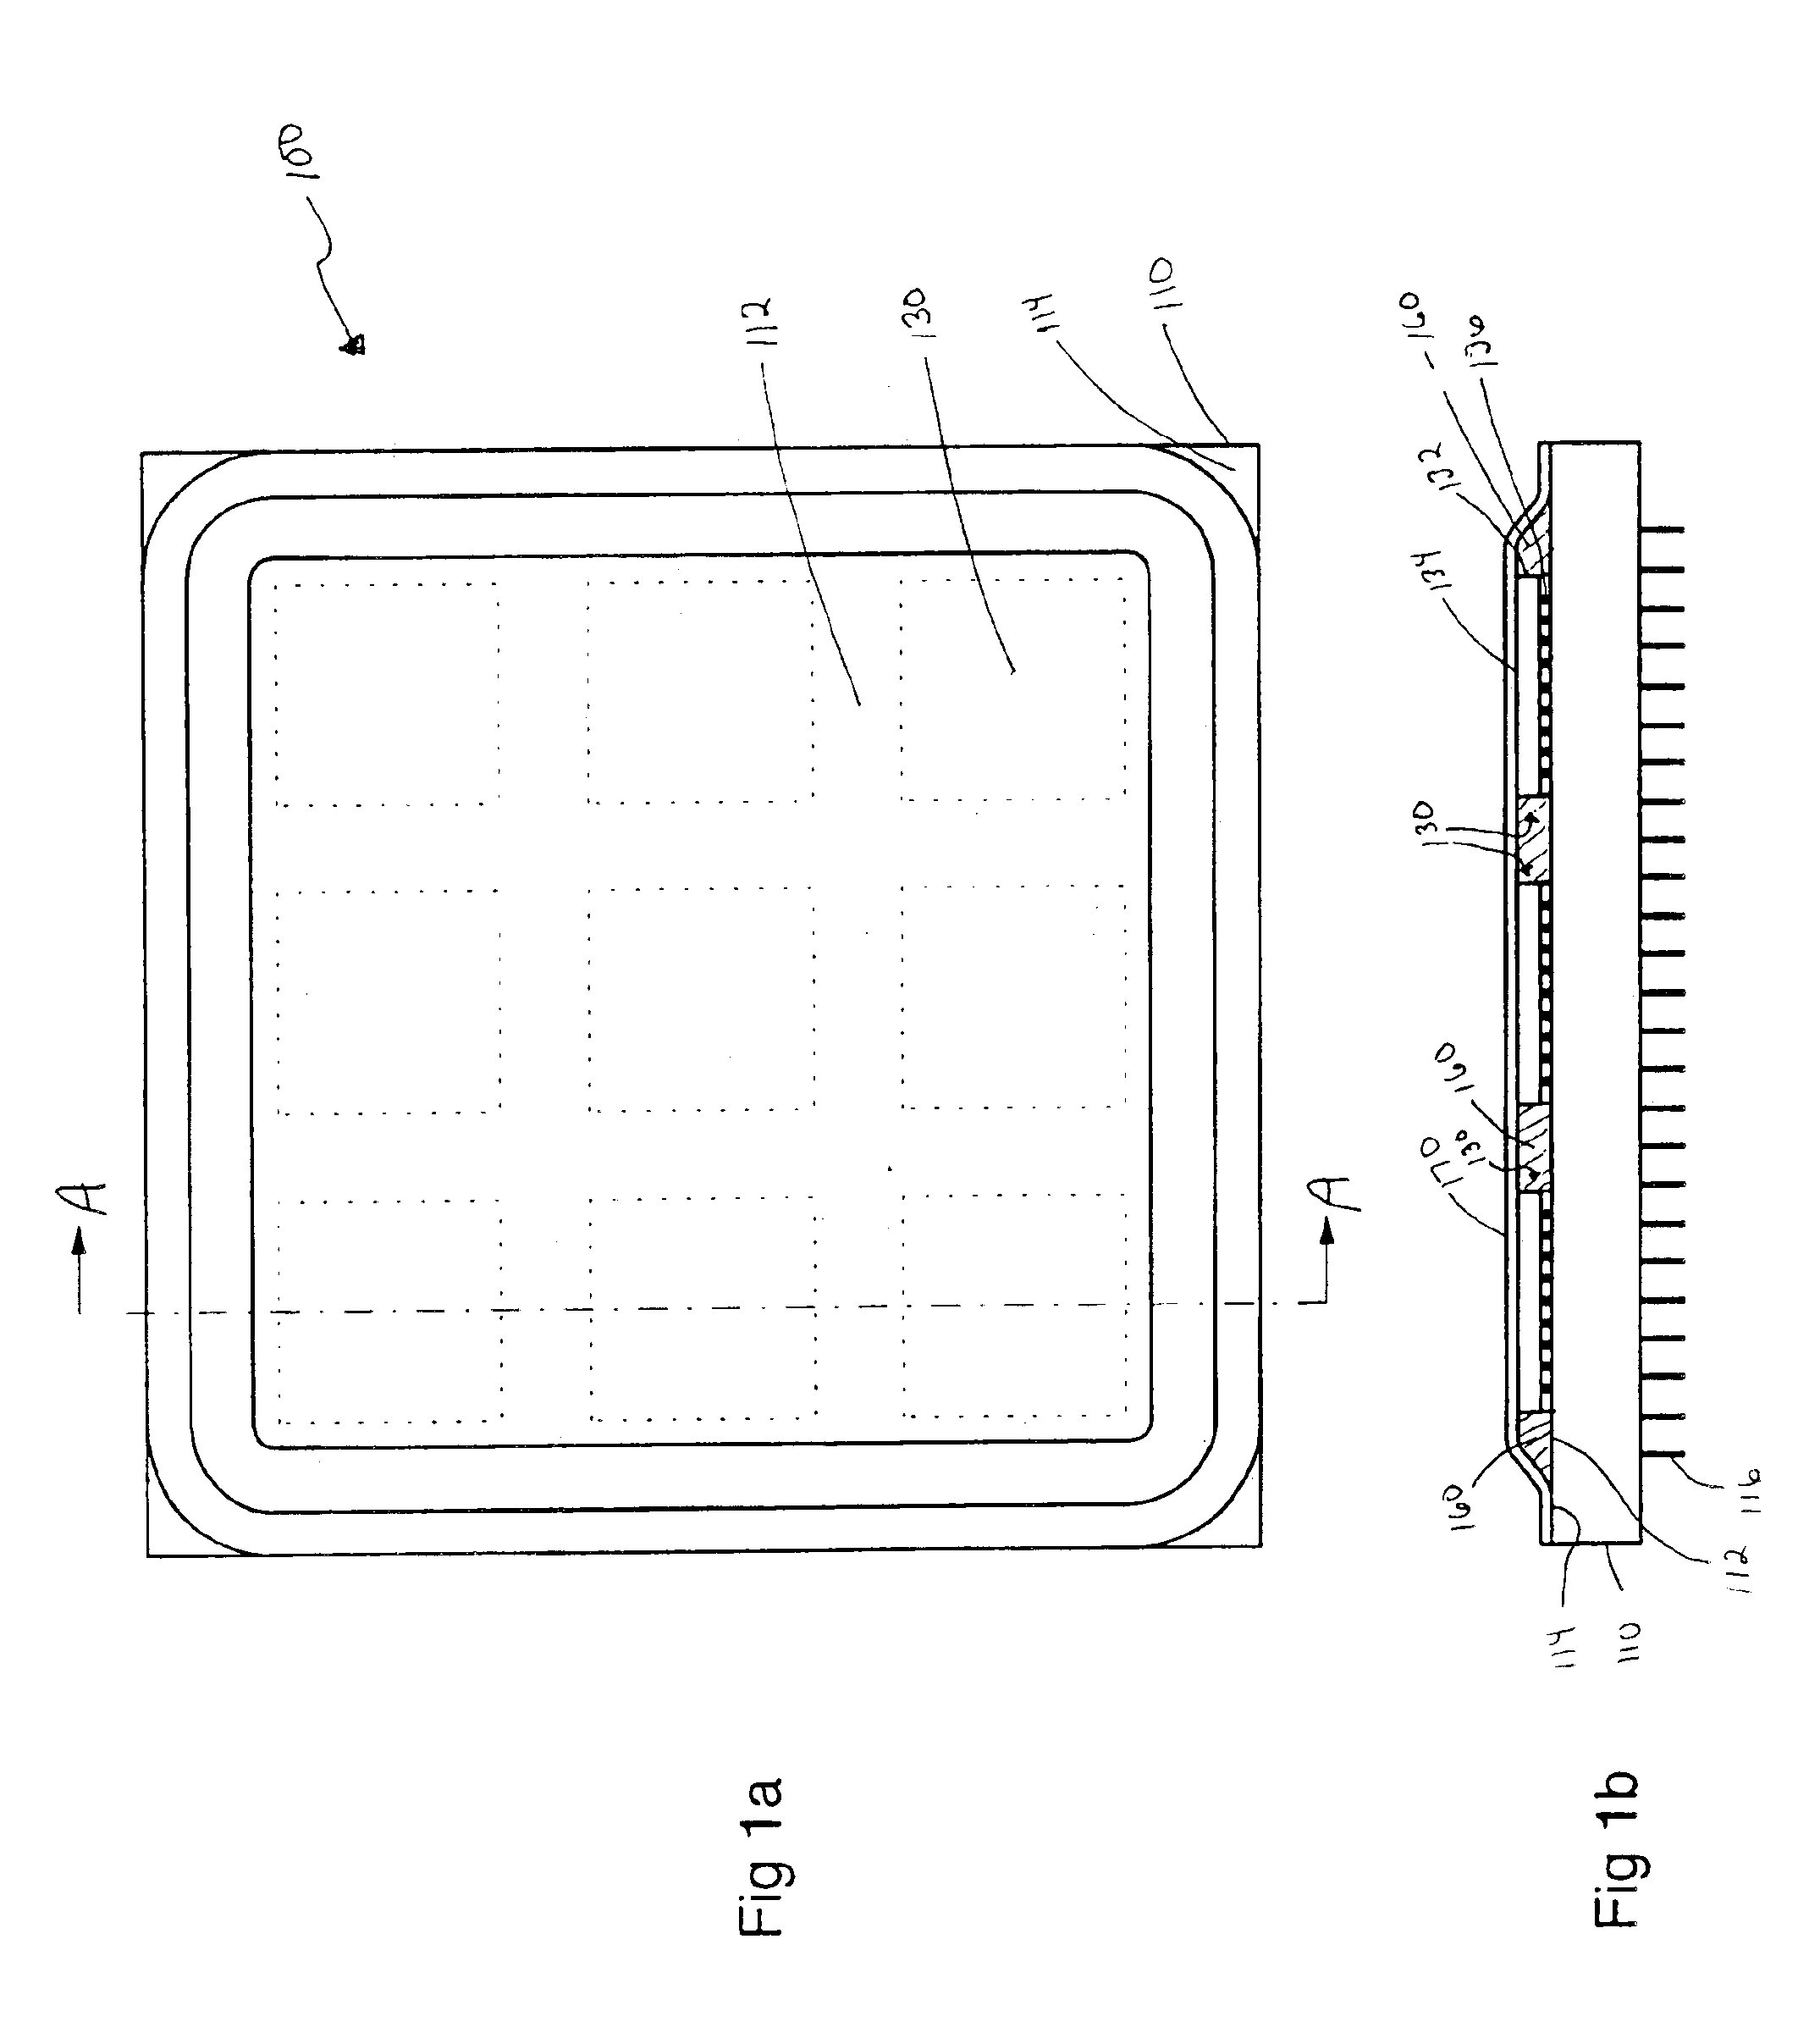 Electronic device substrate assembly with multilayer impermeable barrier and method of making